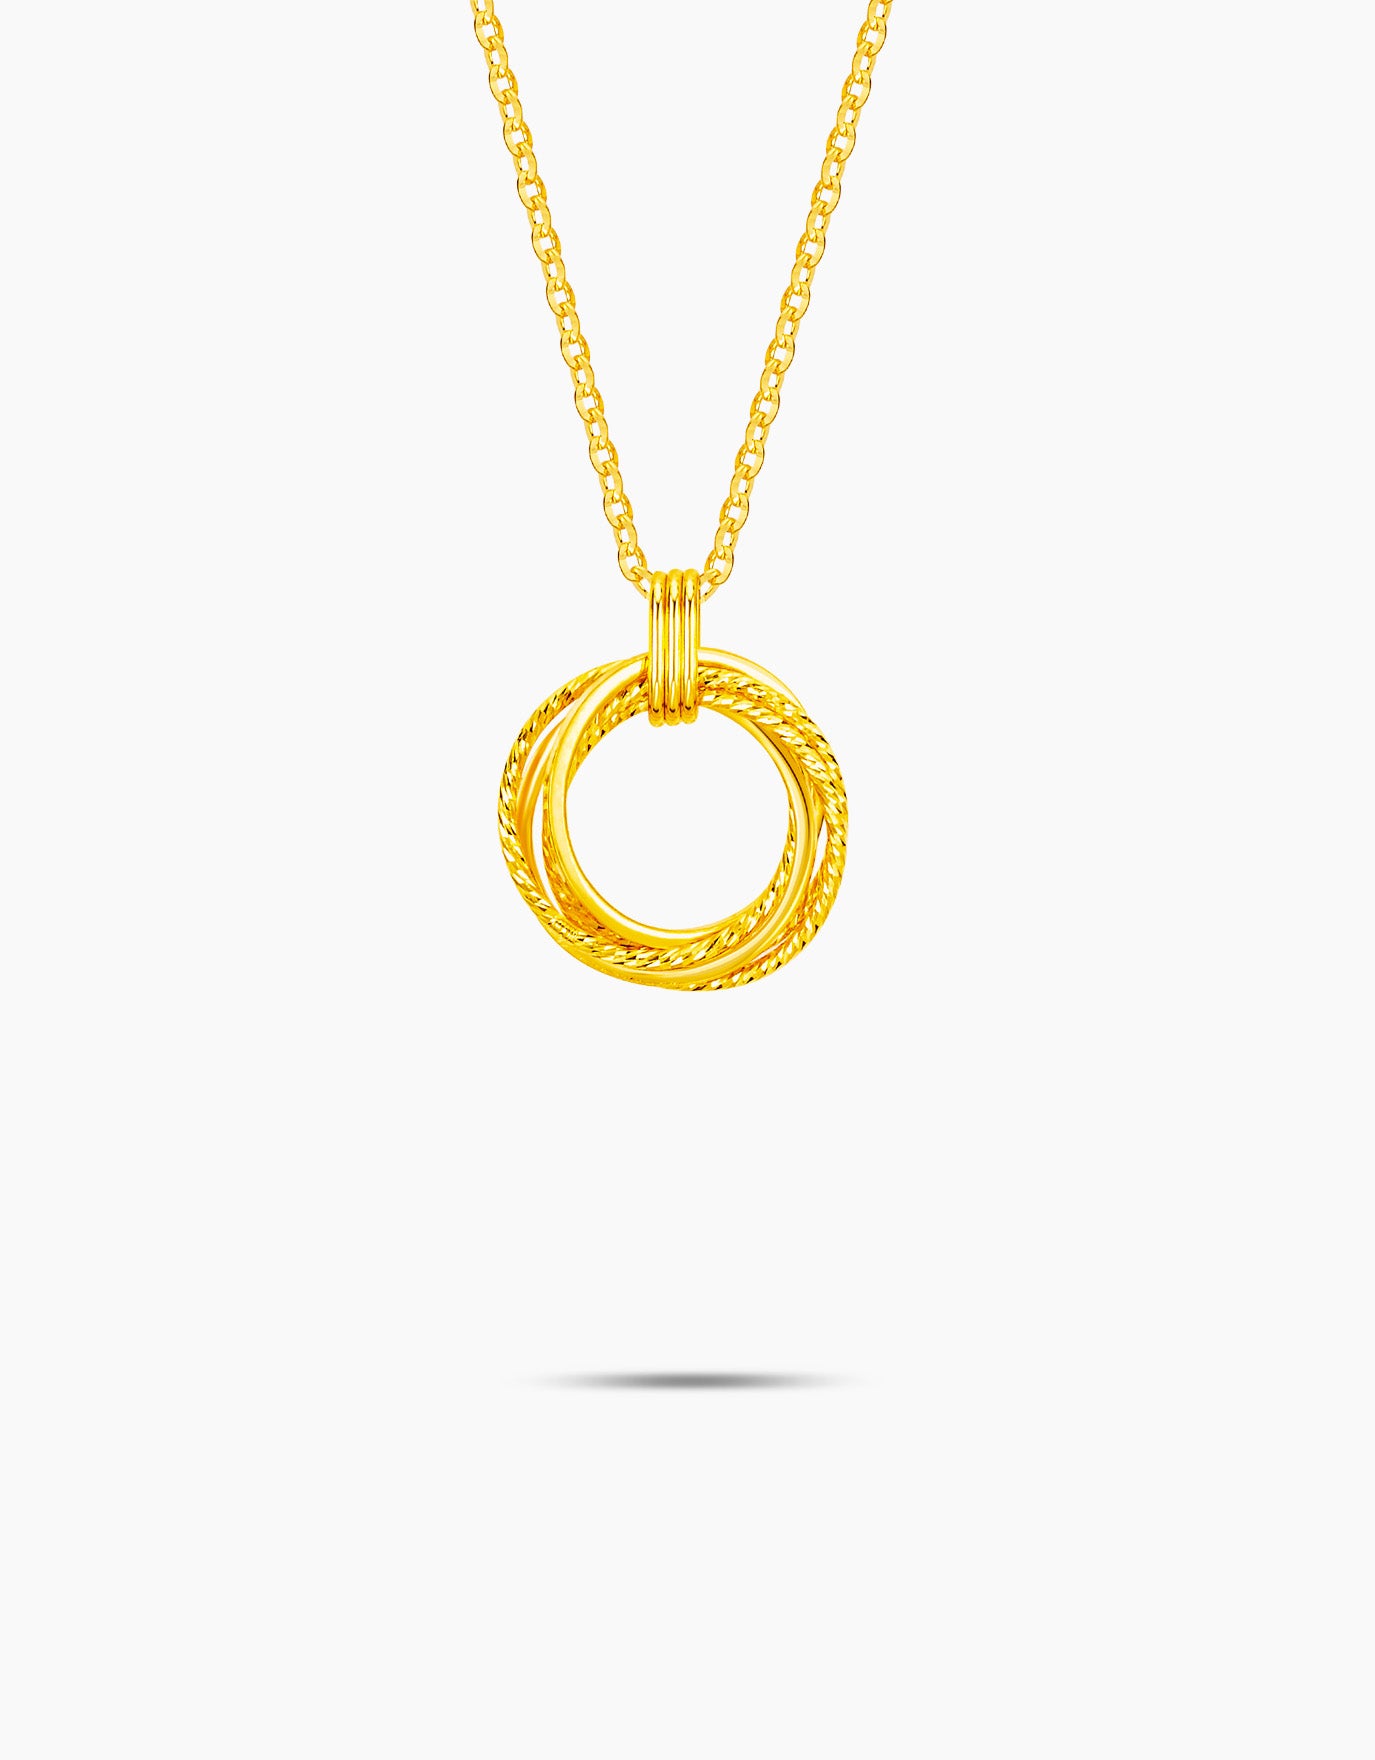 LVC 9IN Trilogy 999 Gold Necklace